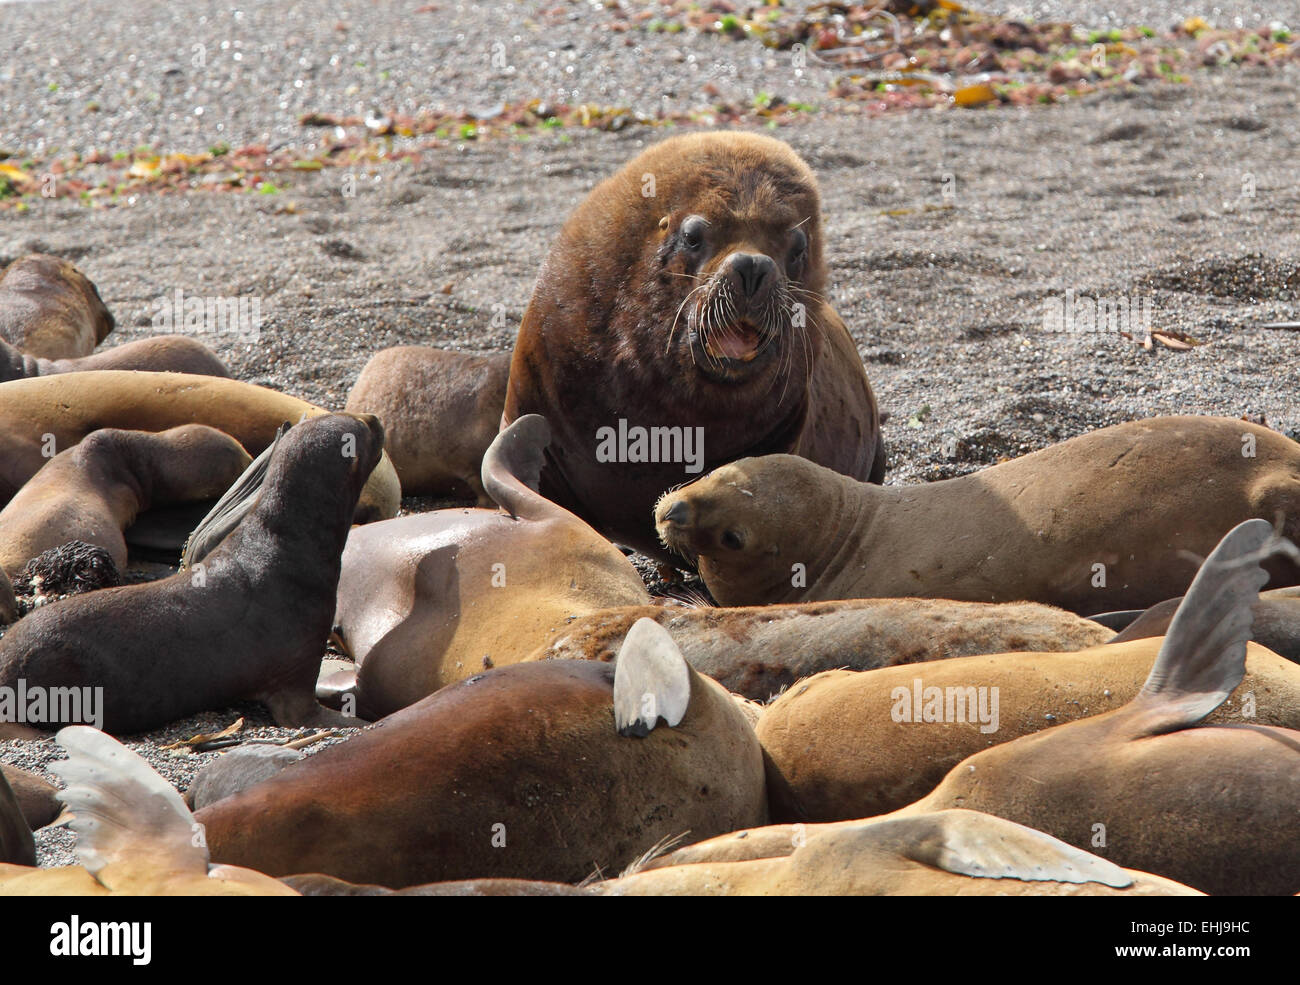 South American sea lion (Otaria flavescens) male and females on beach of Punta Norte, Peninsula Valdes, Patagonia, Argentina Stock Photo